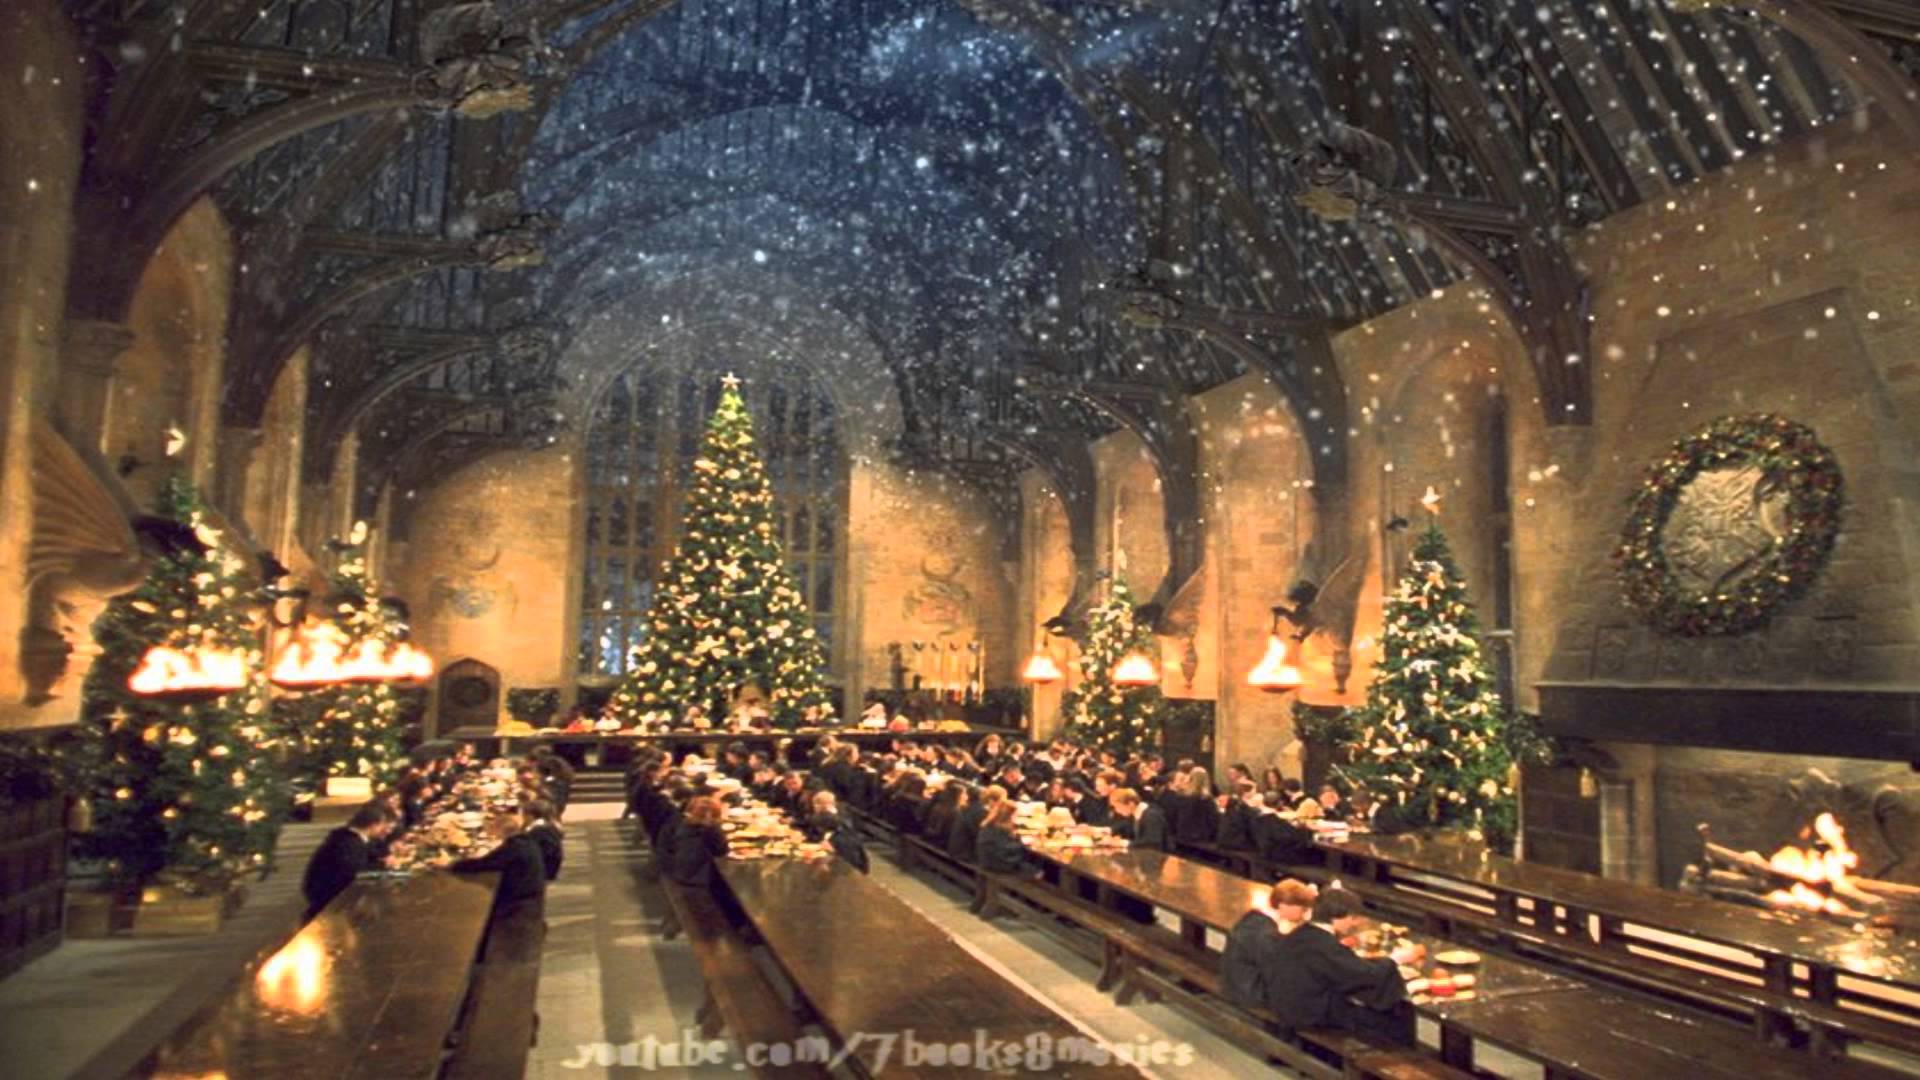 The Brothers Black   Hogwarts is Home for Christmas